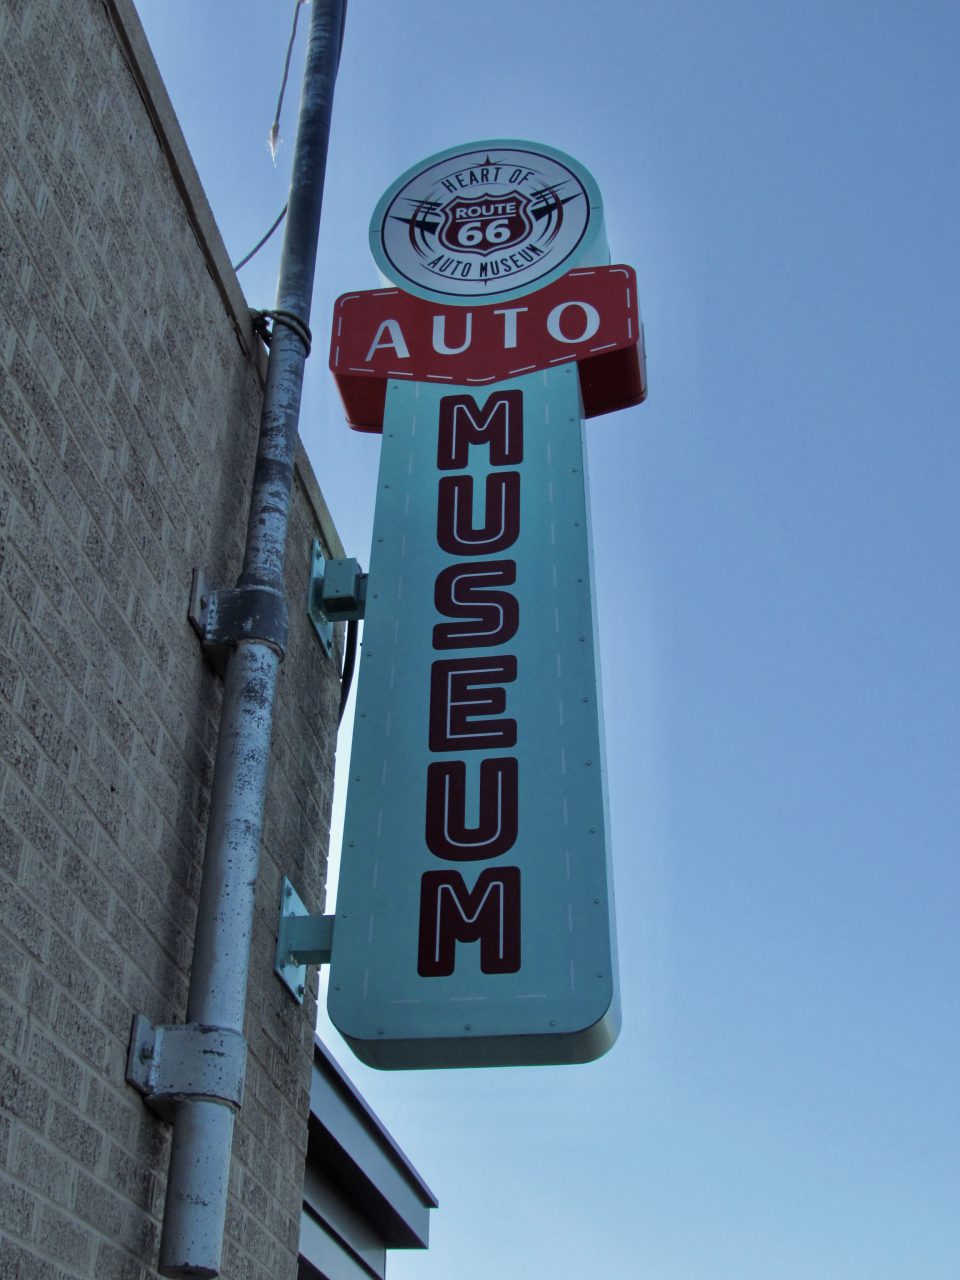 museum, Roadside attraction: 66-foot ‘gas pump’ marks Heart of Route 66 Auto Museum, ClassicCars.com Journal